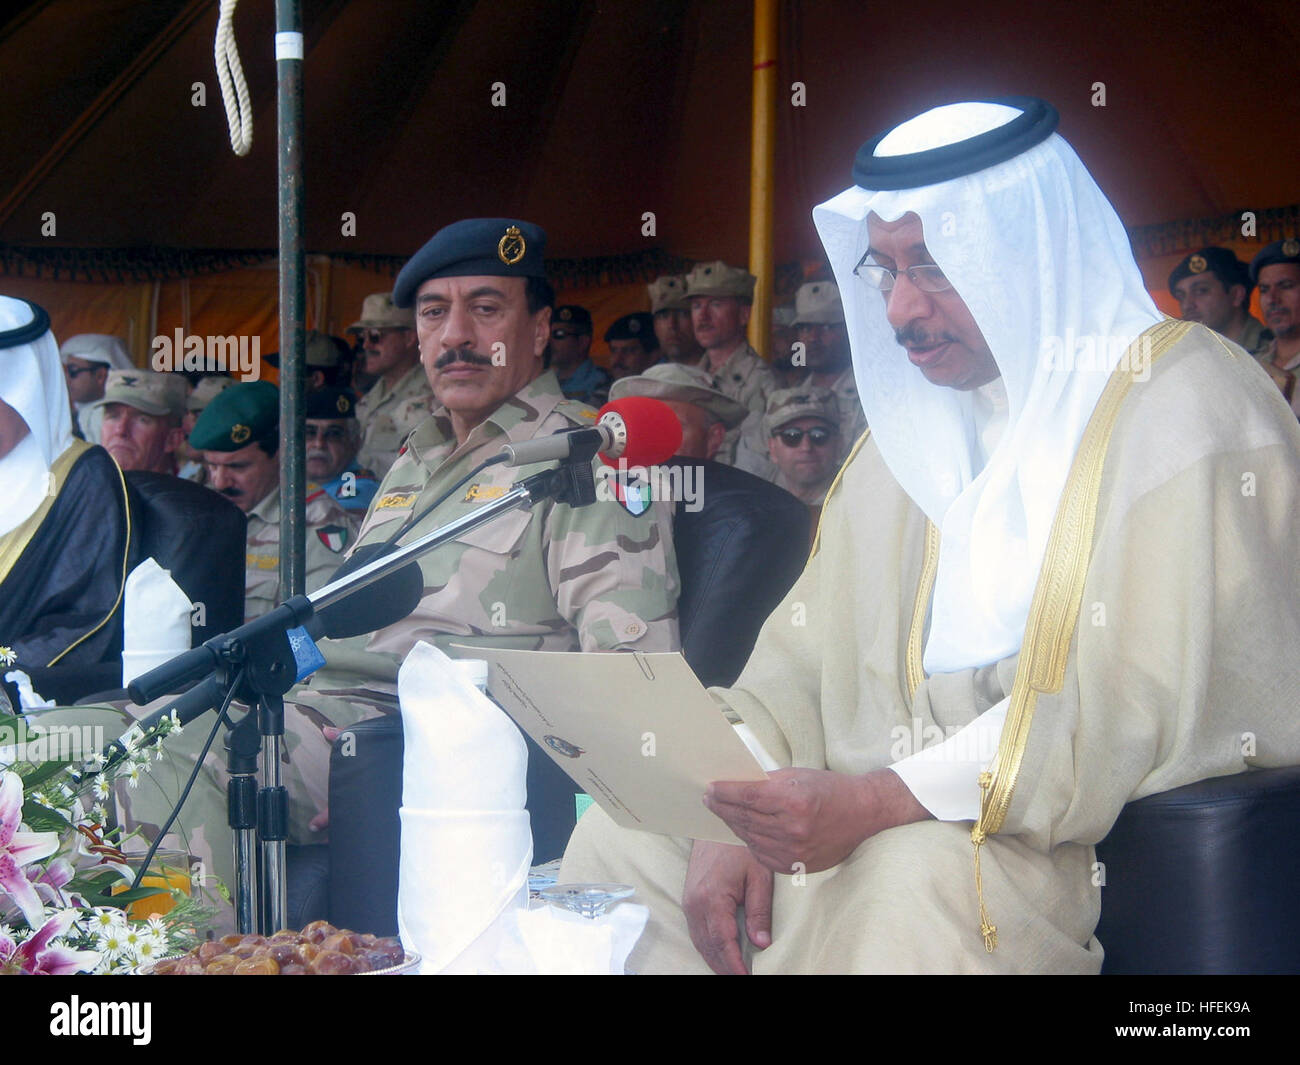 030507-N-1050K-019  Camp Patriot, Kuwait (May 7, 2003) -- From left, KuwaitÕs Armed forces Chief of Staff, Lt. Gen Fahad al-Amir listens to a speech by KuwaitÕs Defense Minister Sheikh Jaber al-Mubarak al-Sabah during the SheikhÕs recent visit to Kuwait Naval Base and Camp Patriot.  Sheikh al-Sabah bid Gulf Country Council (GCC) troops participating in Peninsula Shield farewell and thanks during a brief visit and ceremony attended by hundreds of area commanders and troops from the GCC states as well as U.S., British and Australian military leaders. The GCC is made up of members from the nation Stock Photo